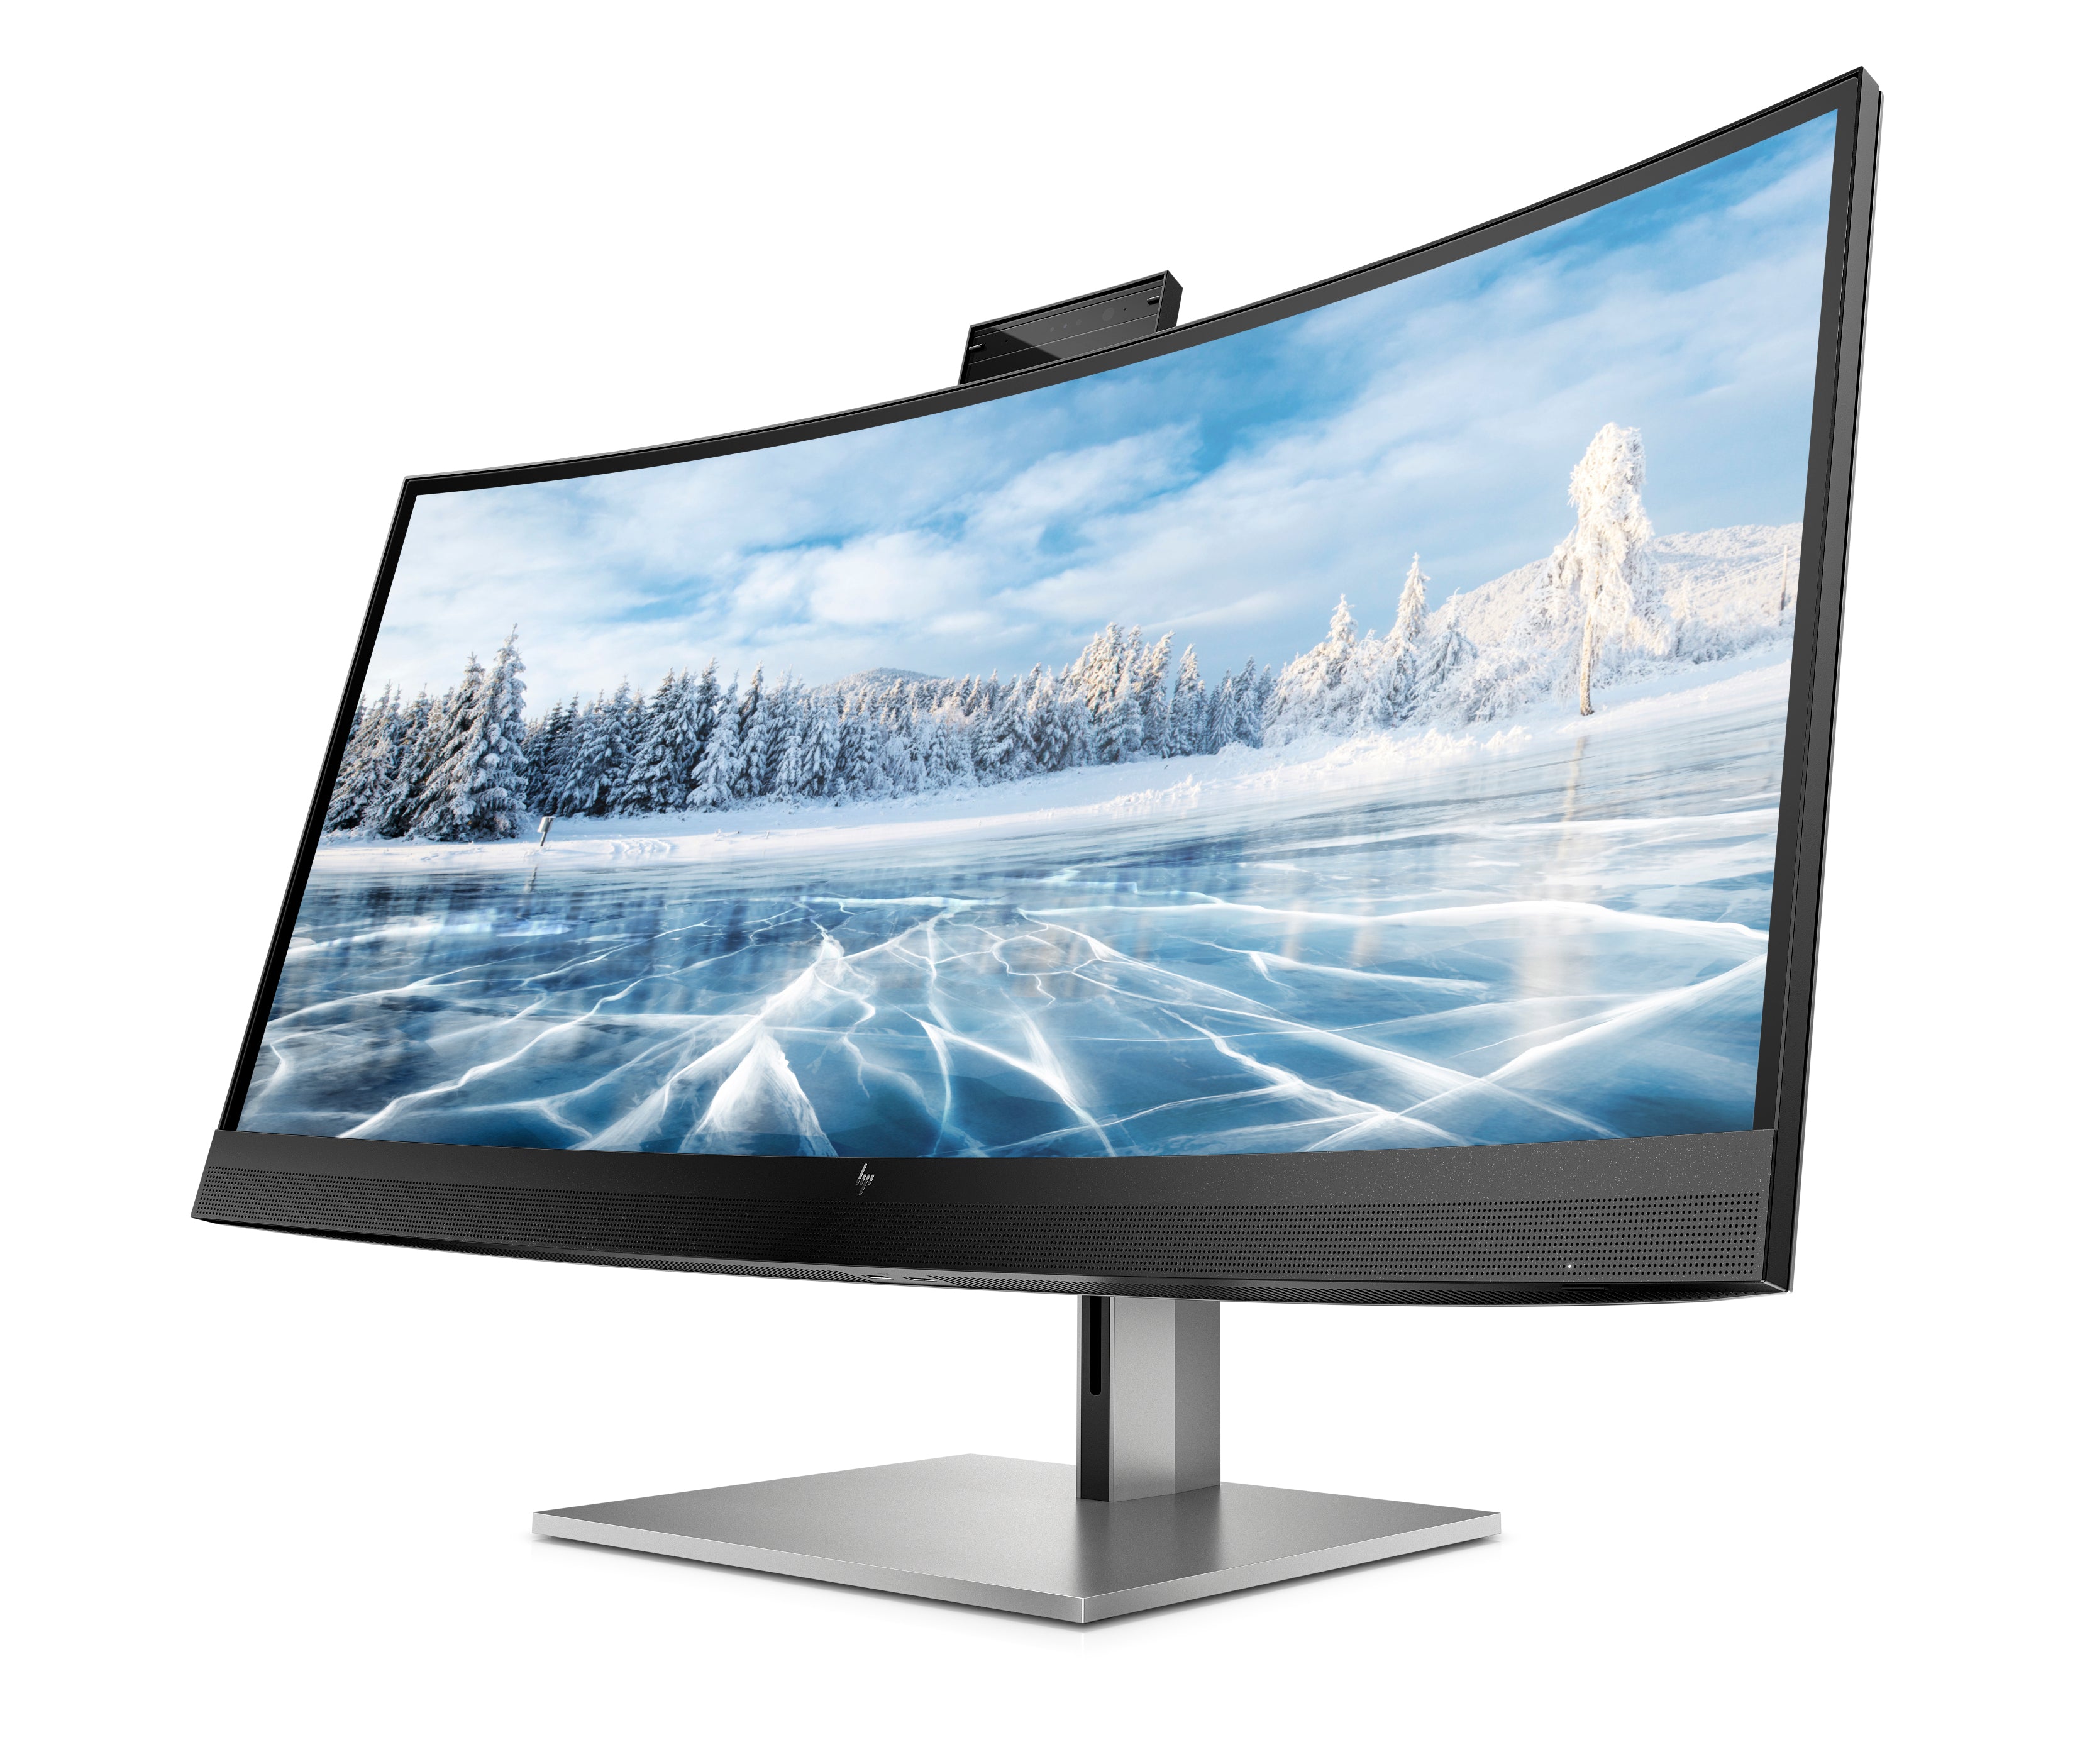 HP Z34c G3 Curved Display